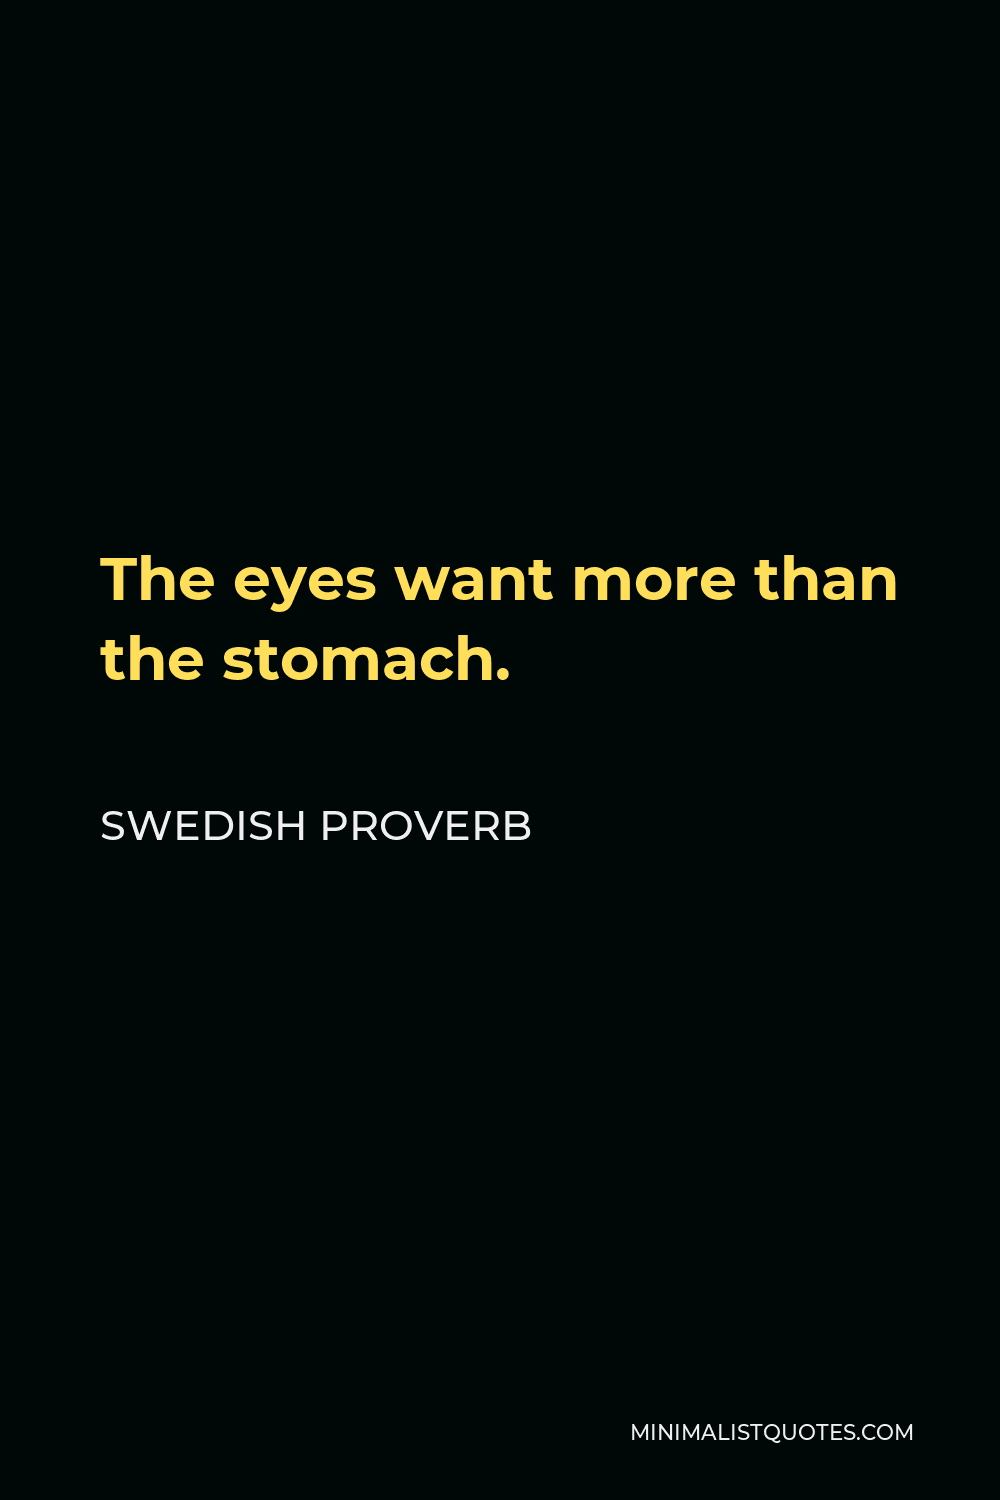 Swedish Proverb Quote - The eyes want more than the stomach.